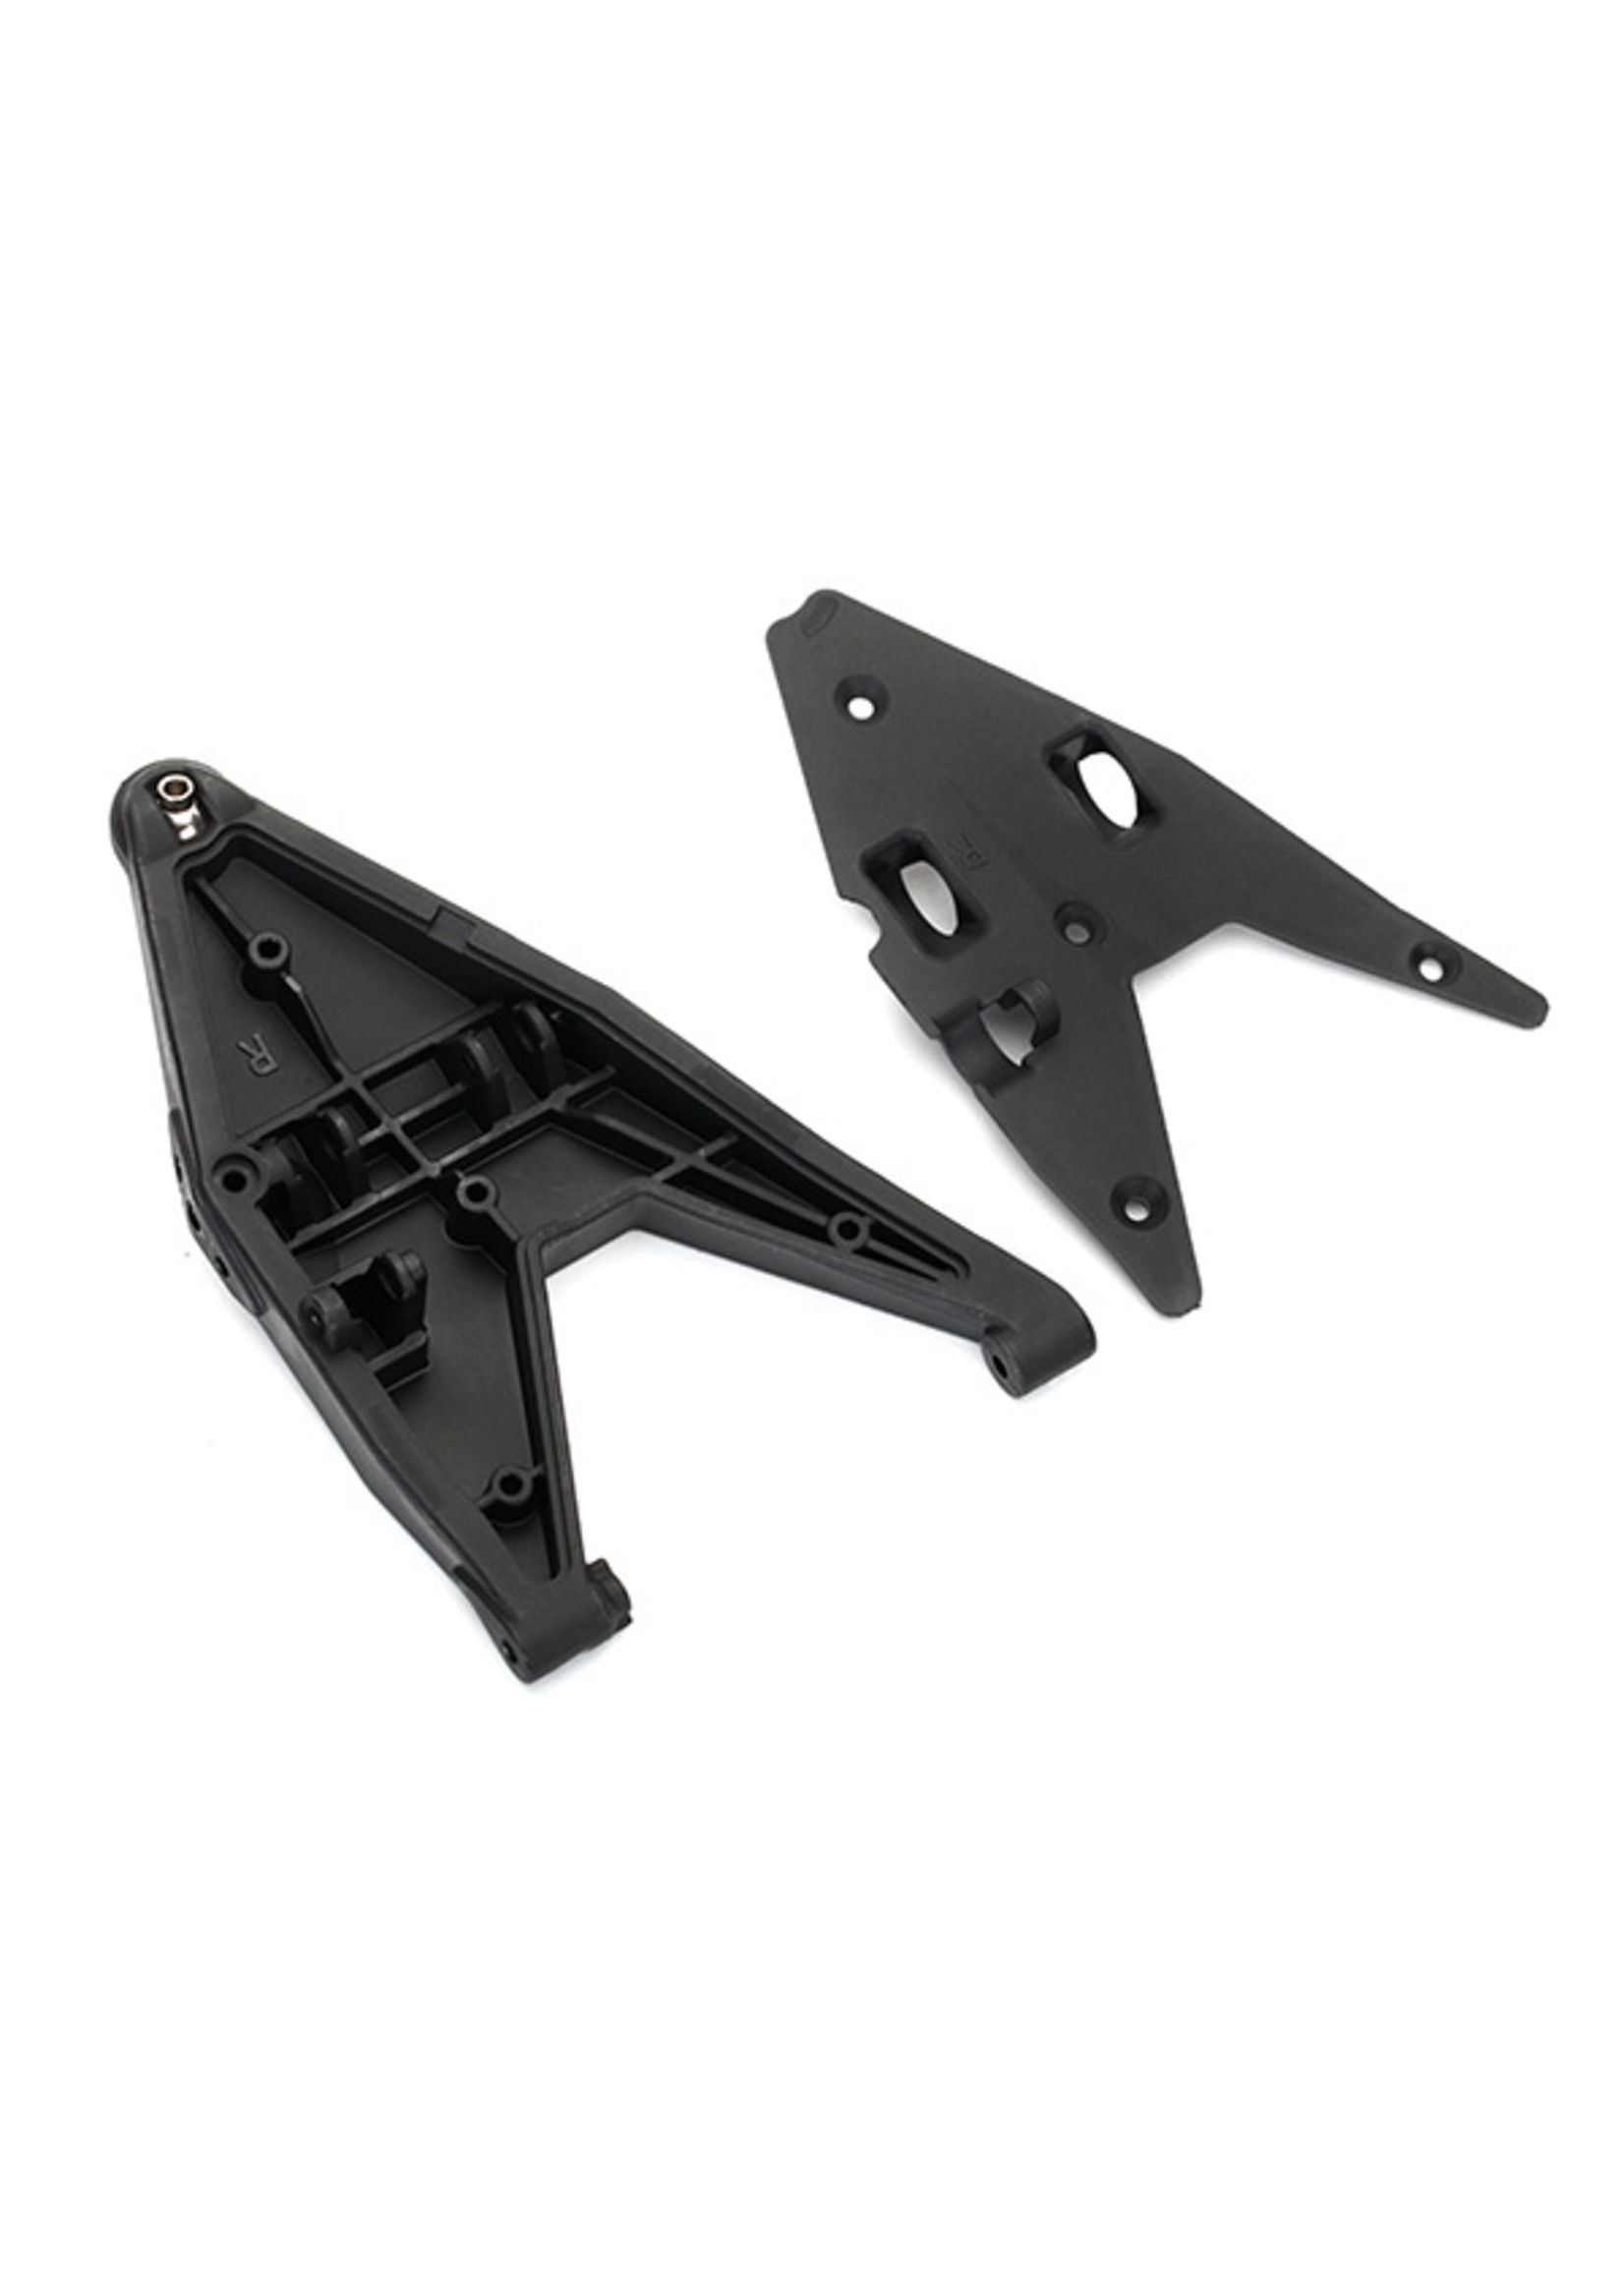 Traxxas 8532 - Suspension Arm Lower Right